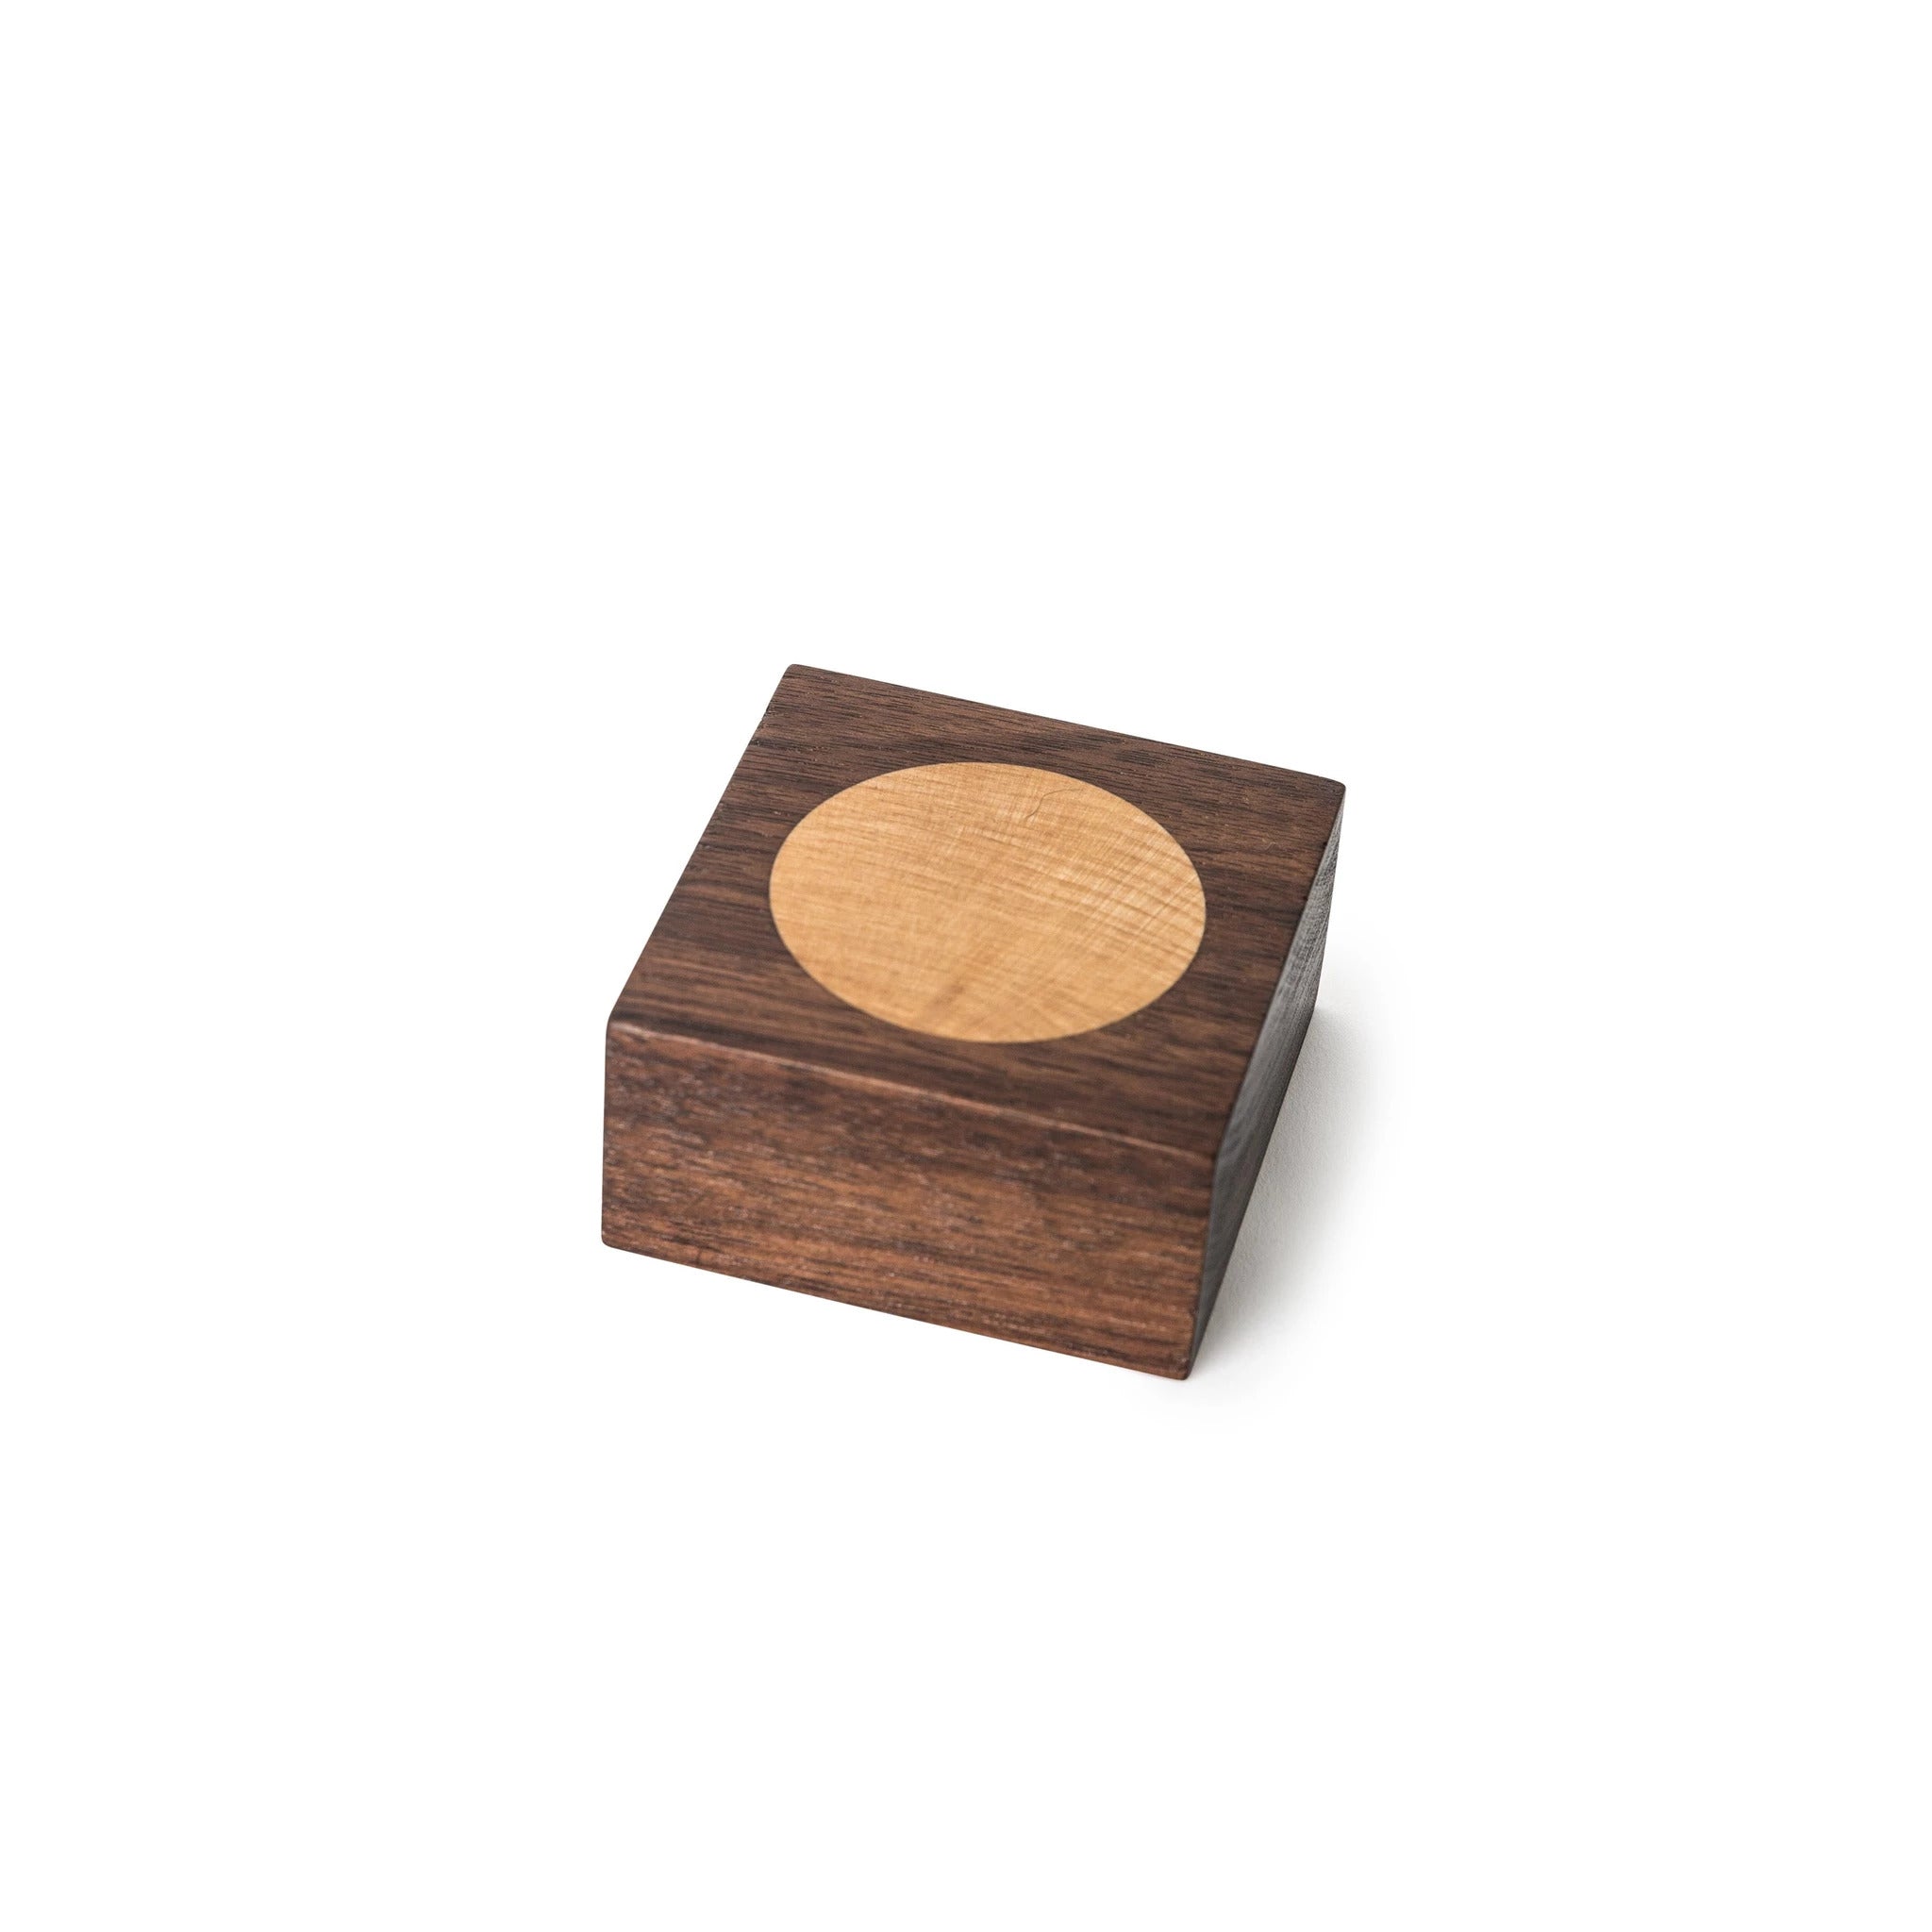 Walnut Wooden Desk Set | Design by Robyn Wood - CoCo Contemporary Connoisseur Gift Store